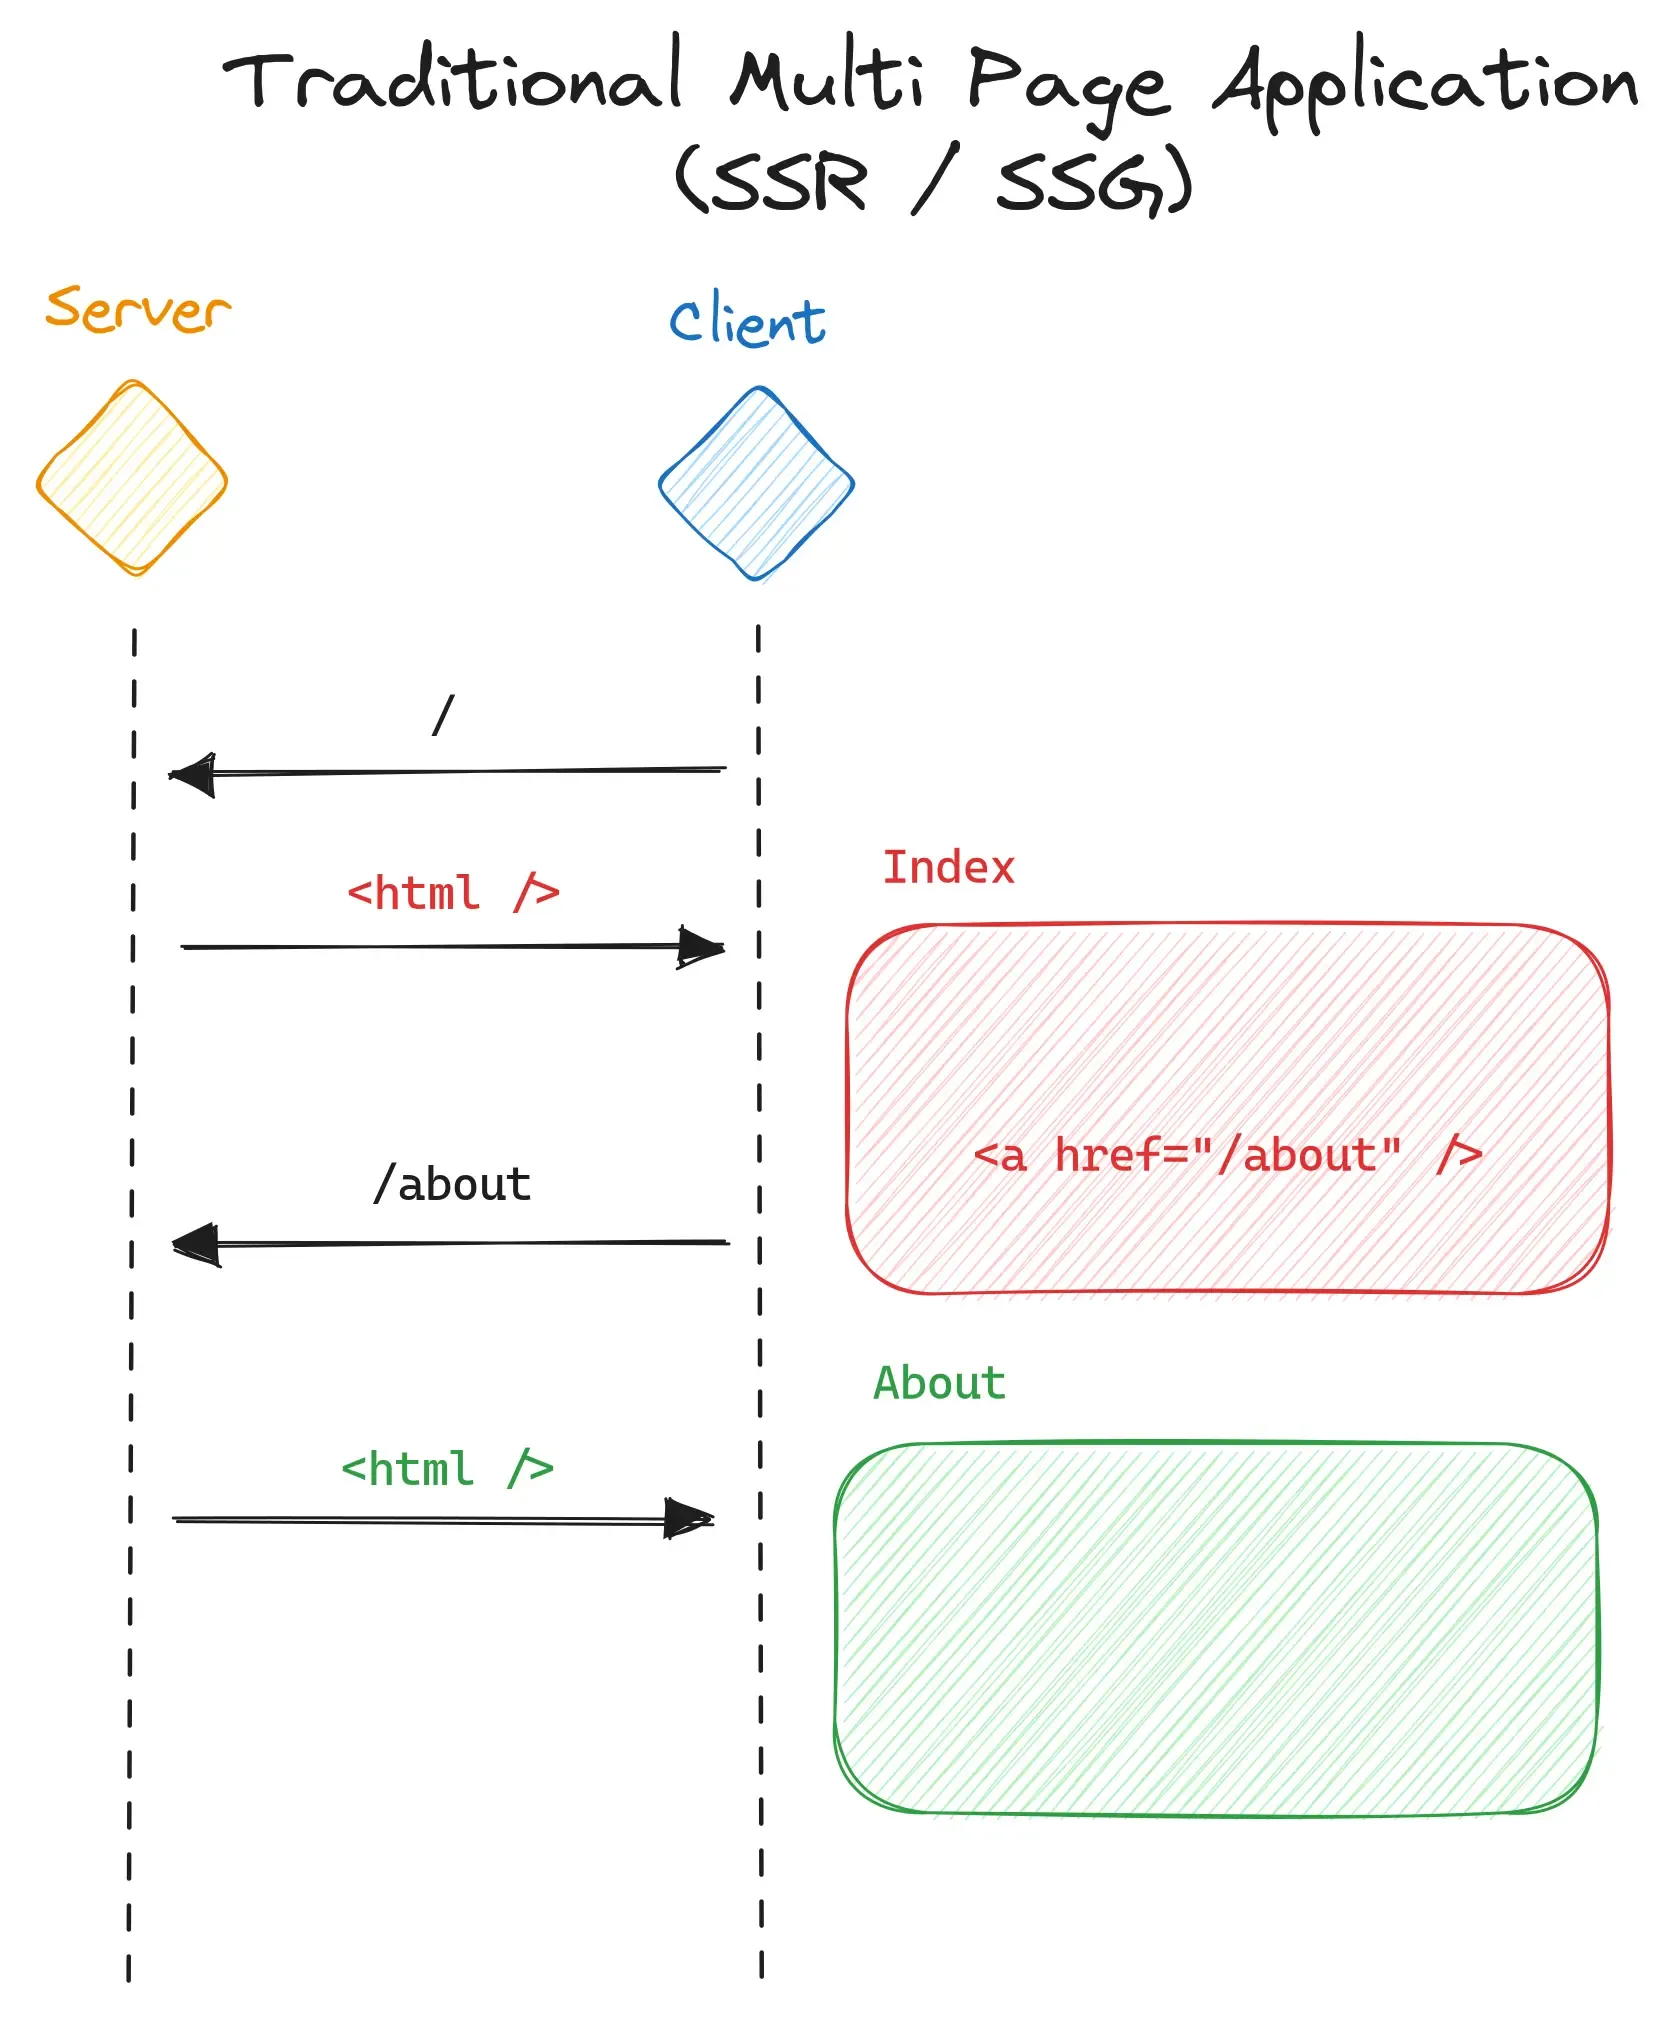 Flowchart of a traditional multi-page application